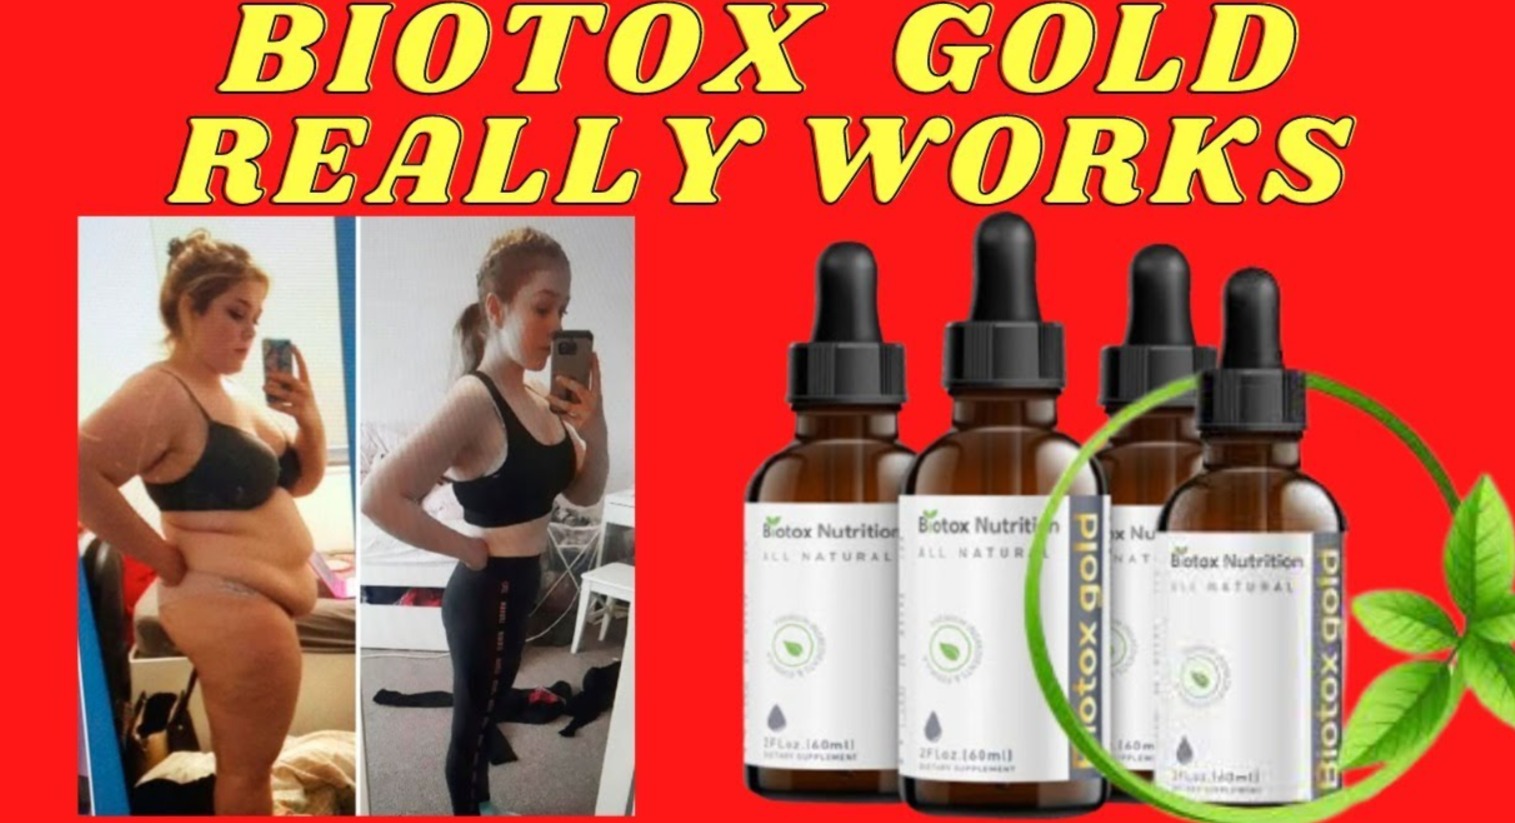 Does Biotox Gold 2.0 Help You Lose Weight - The Truth Revealed